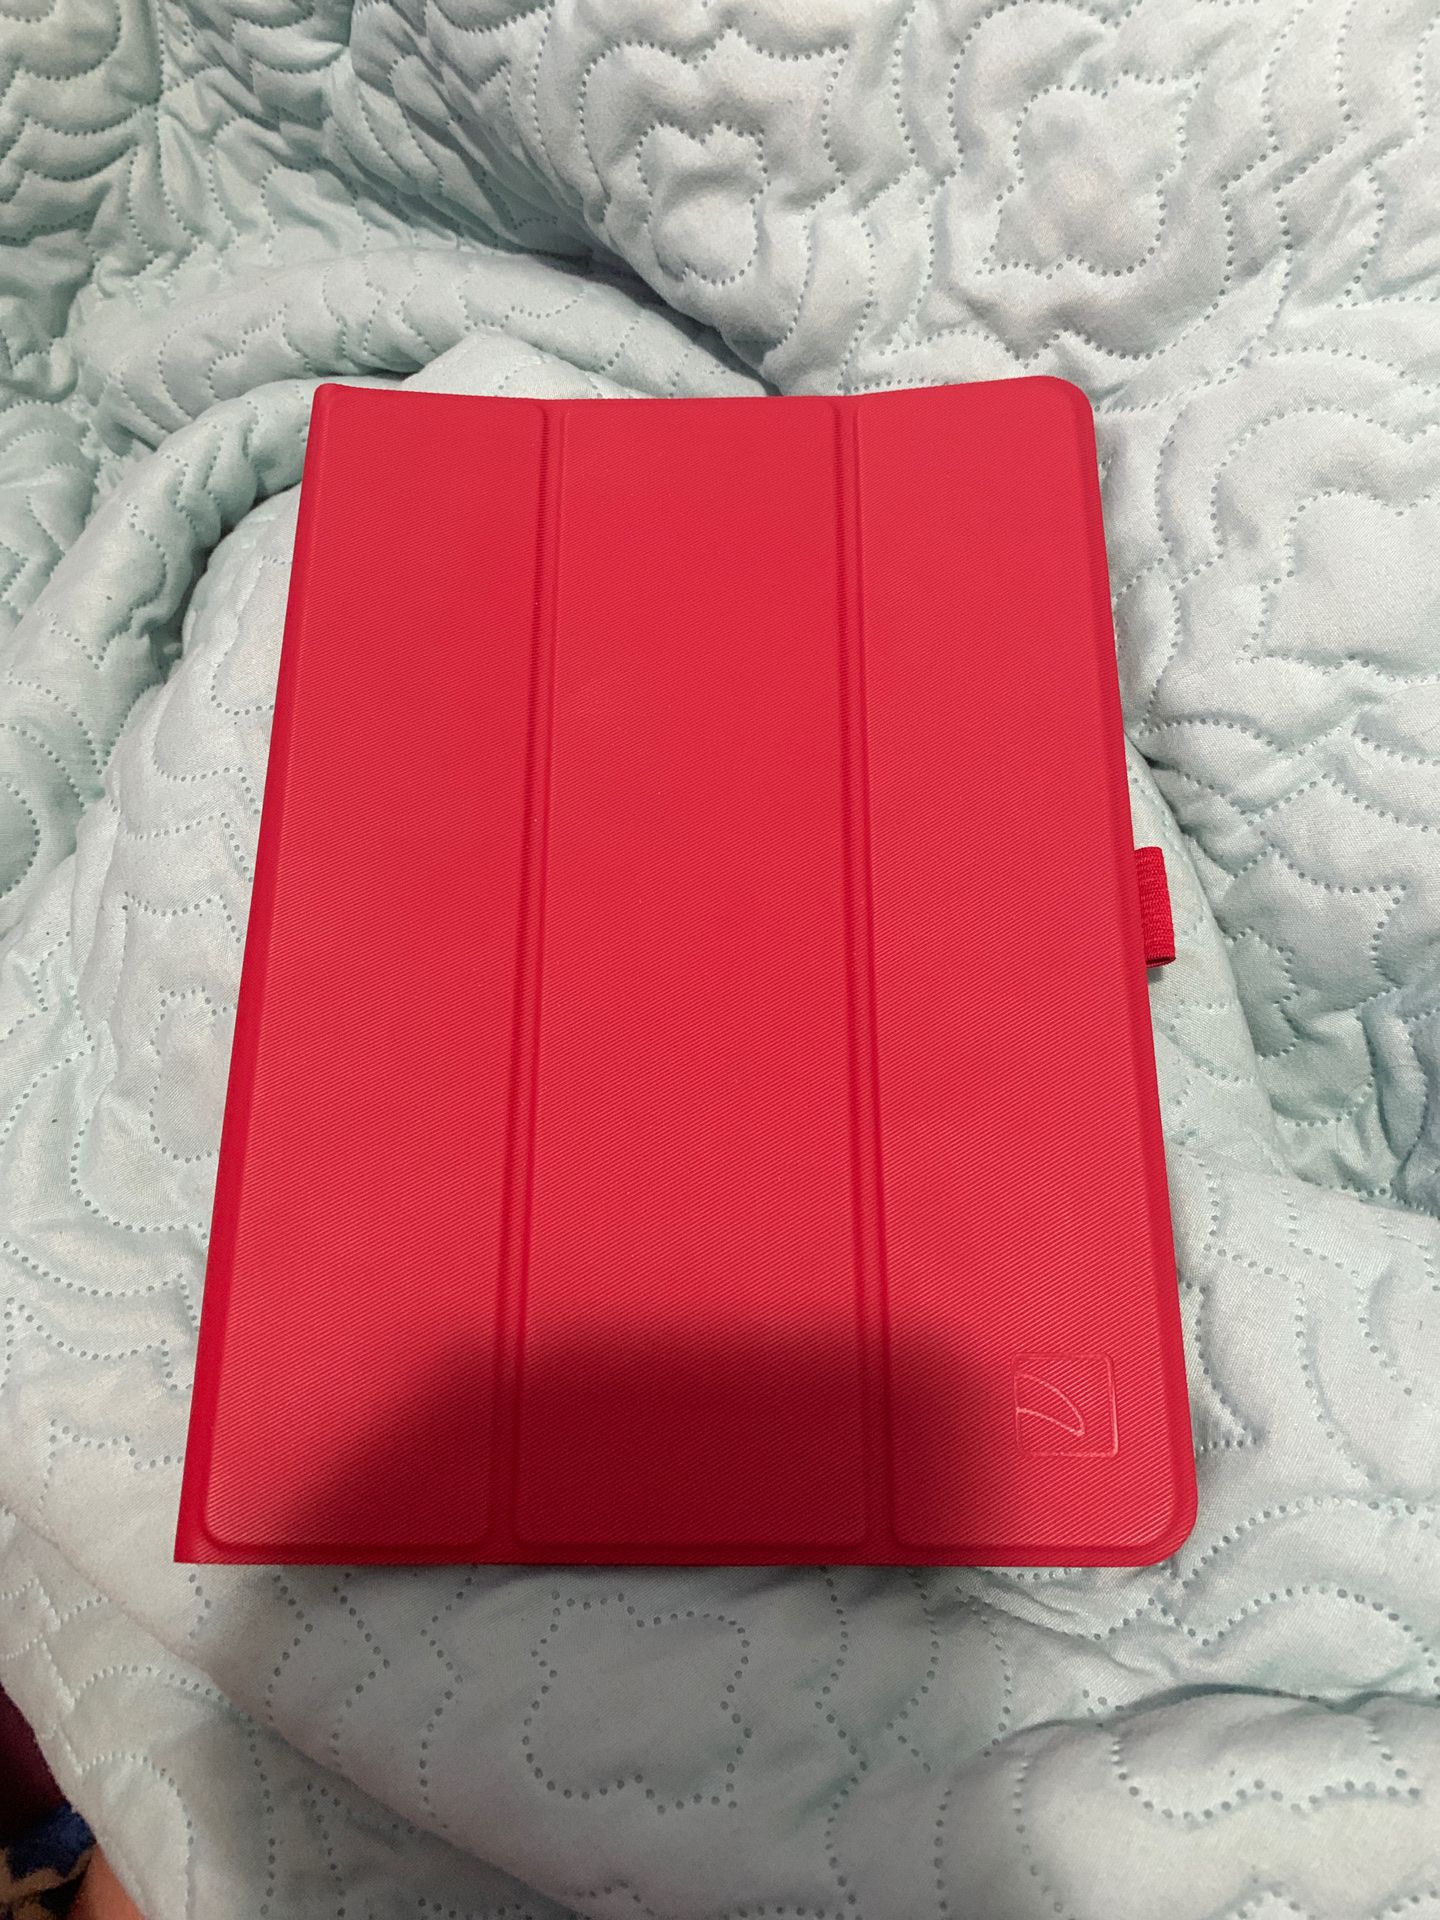 Red cover for ipad brand new never used